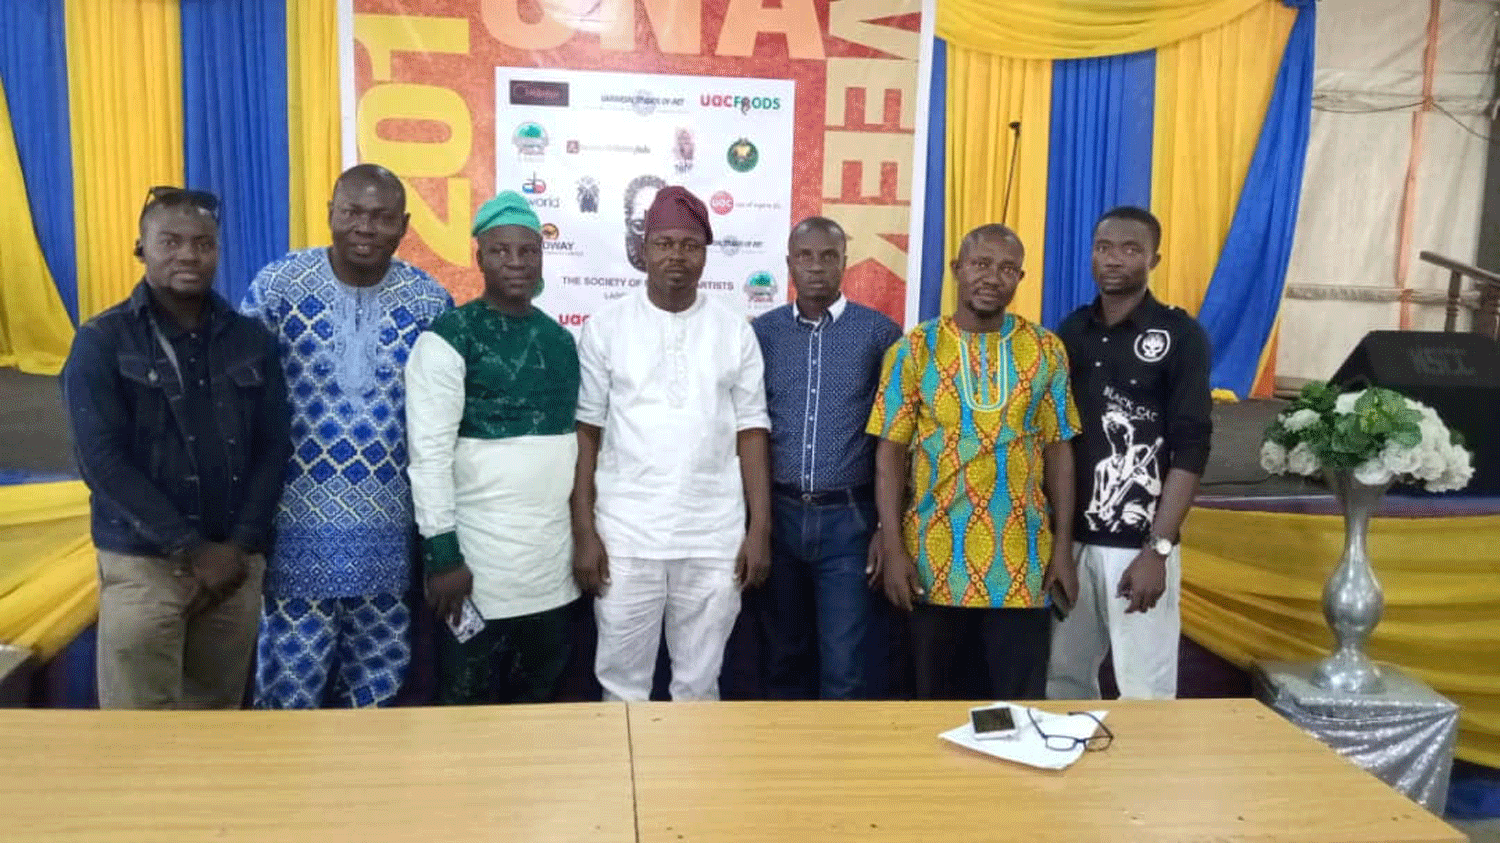 SNA Lagos chapter holds annual art fiesta